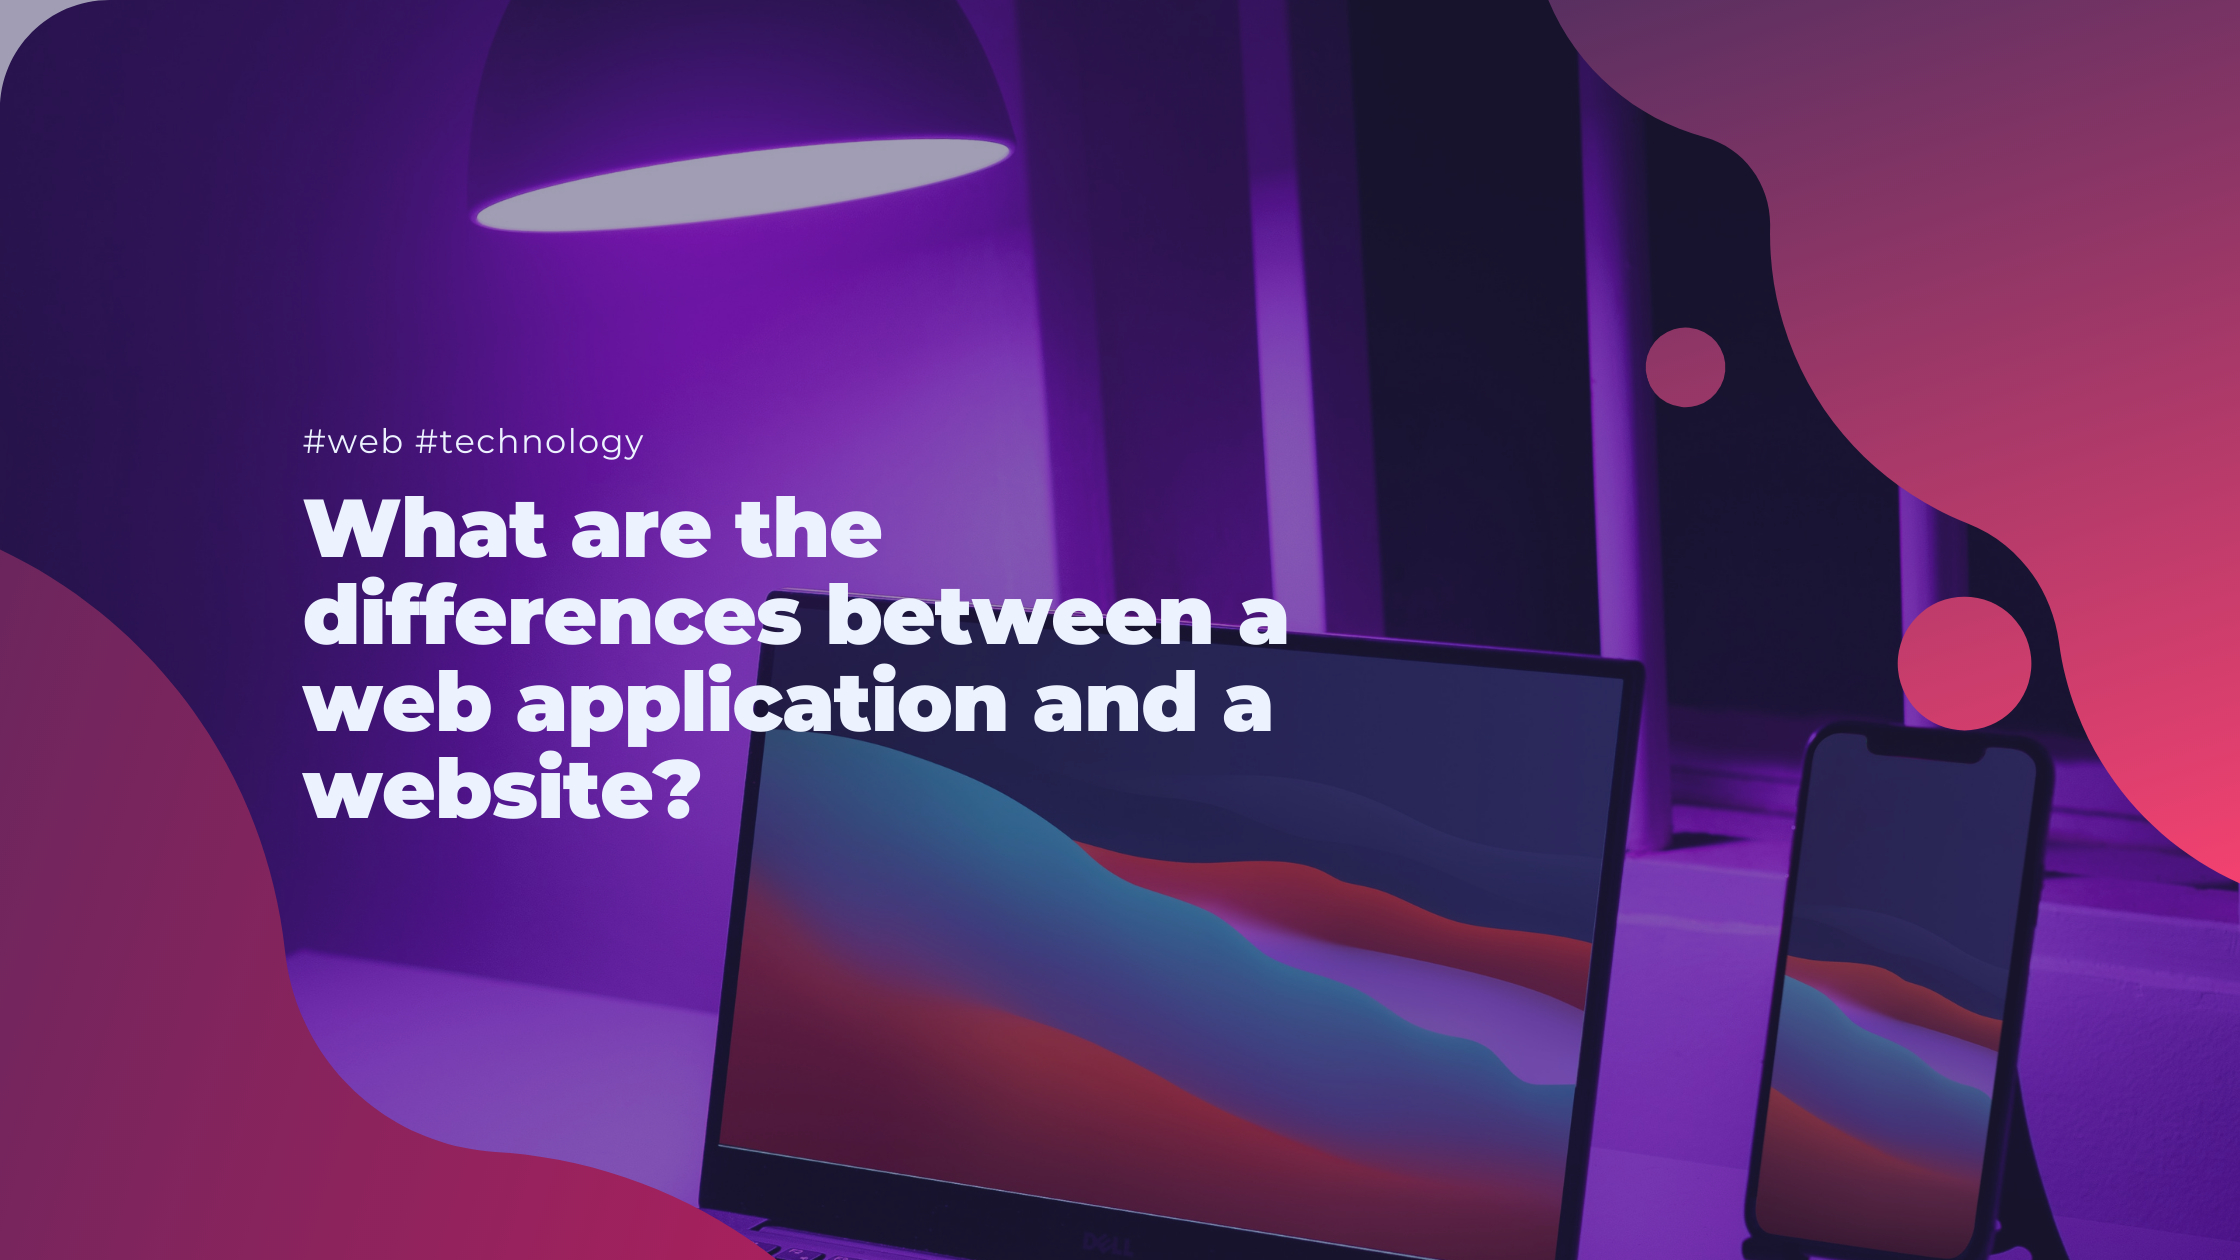 What are the differences between a web application and a website?